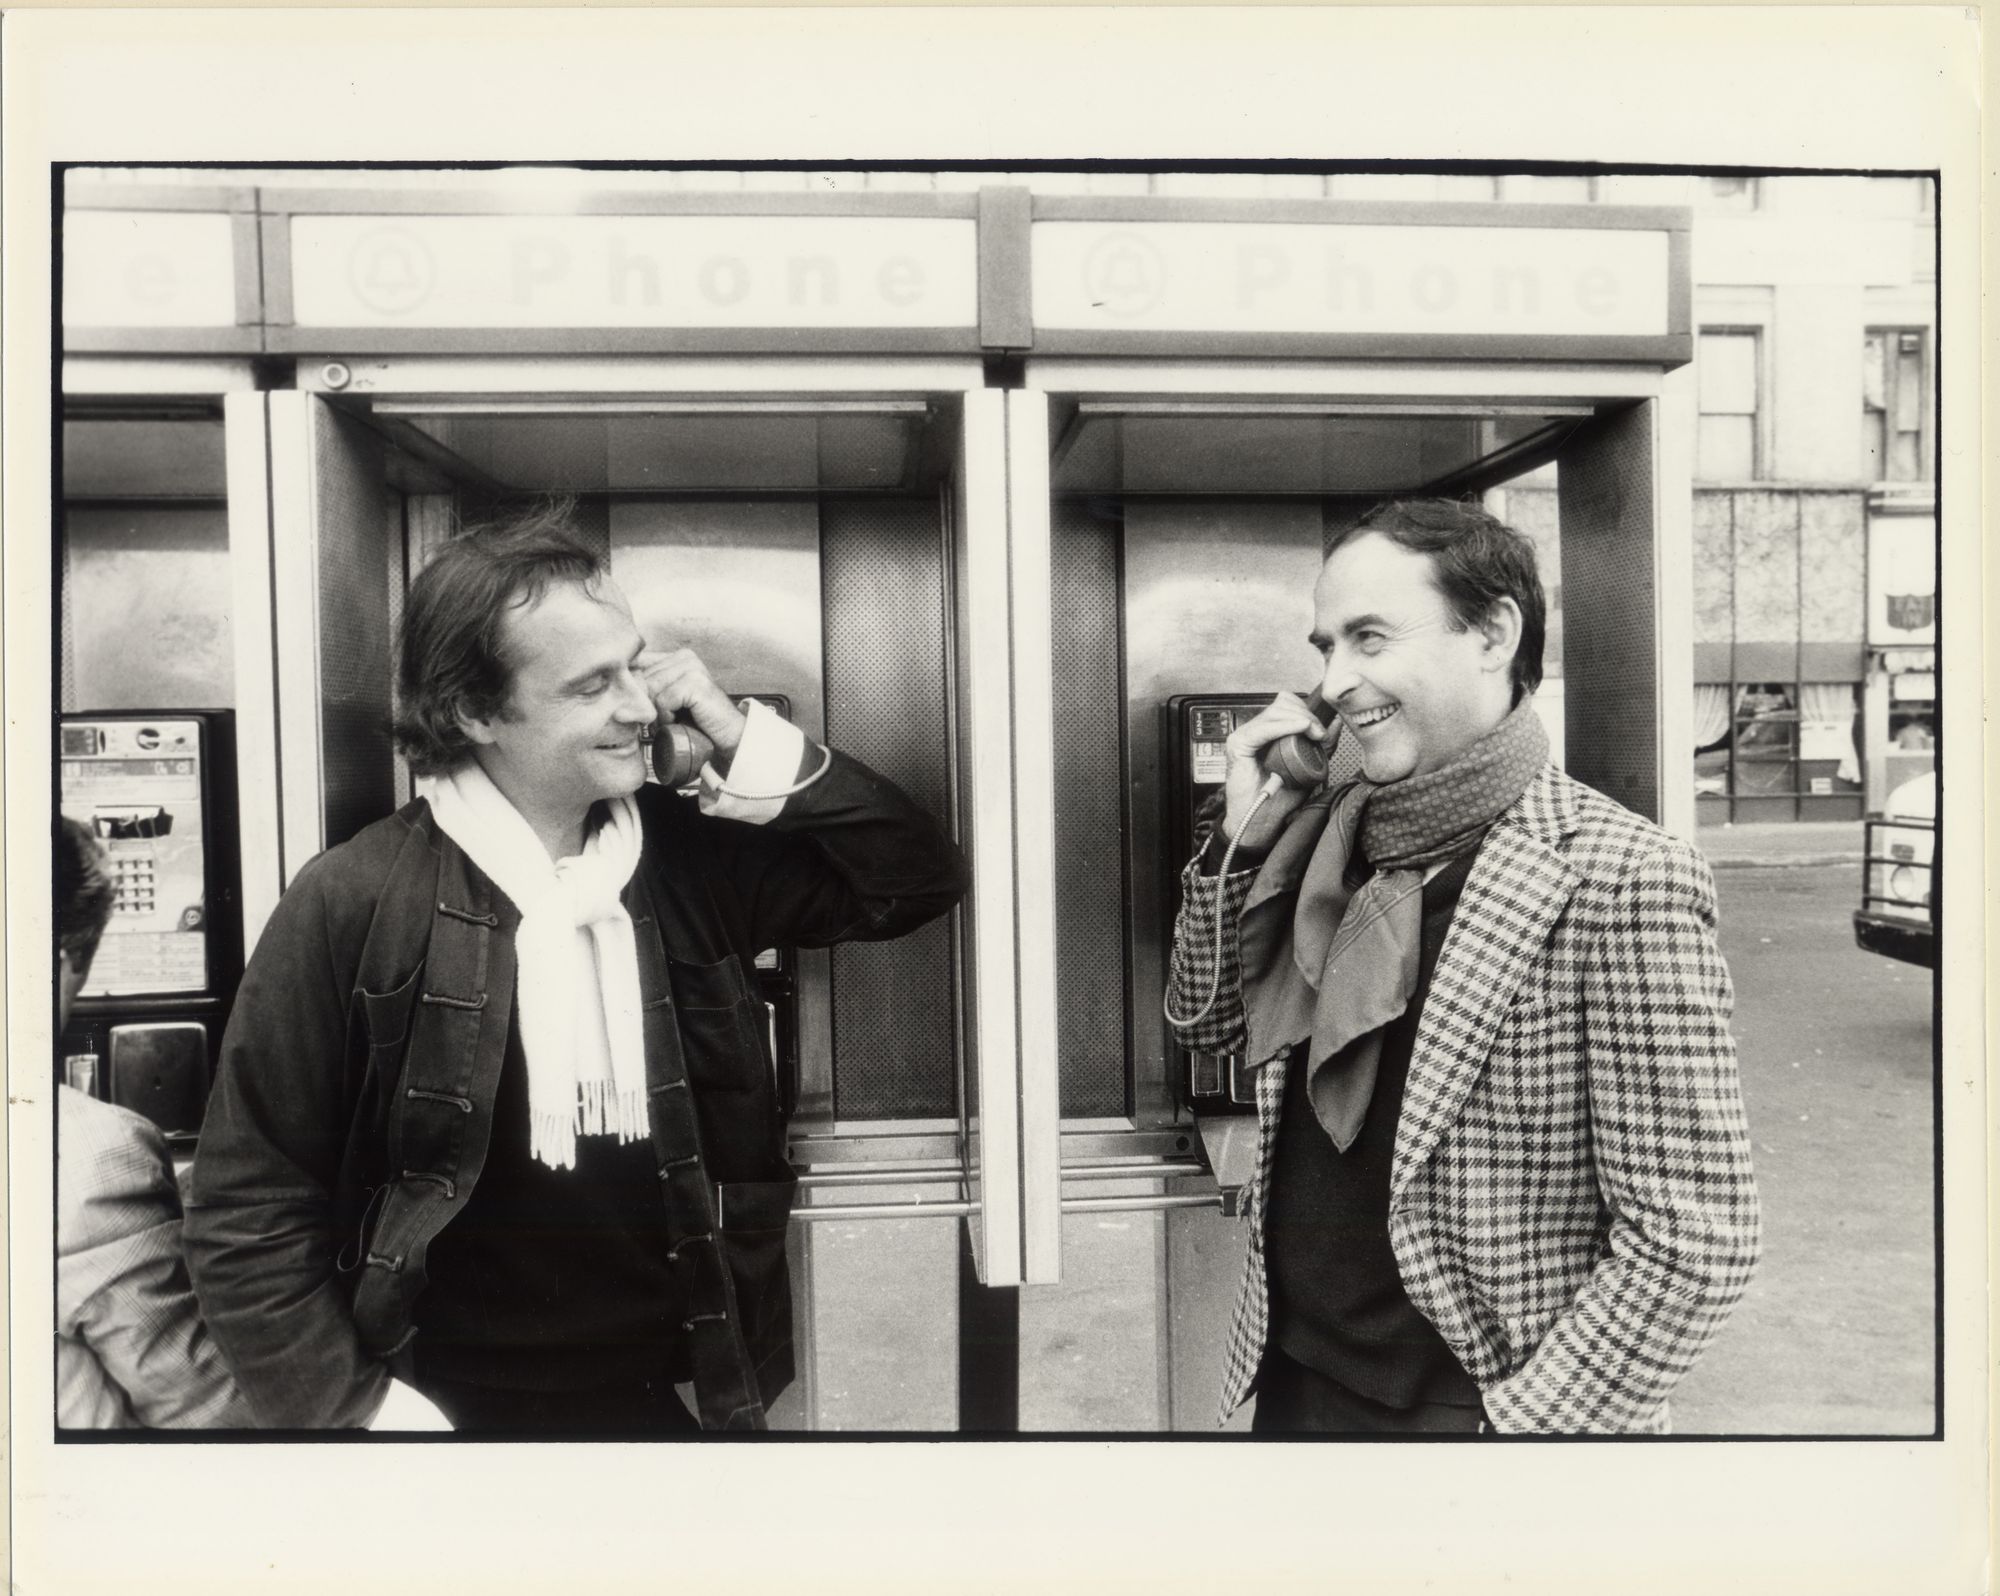 Two men in a phone booth face each other while talking.